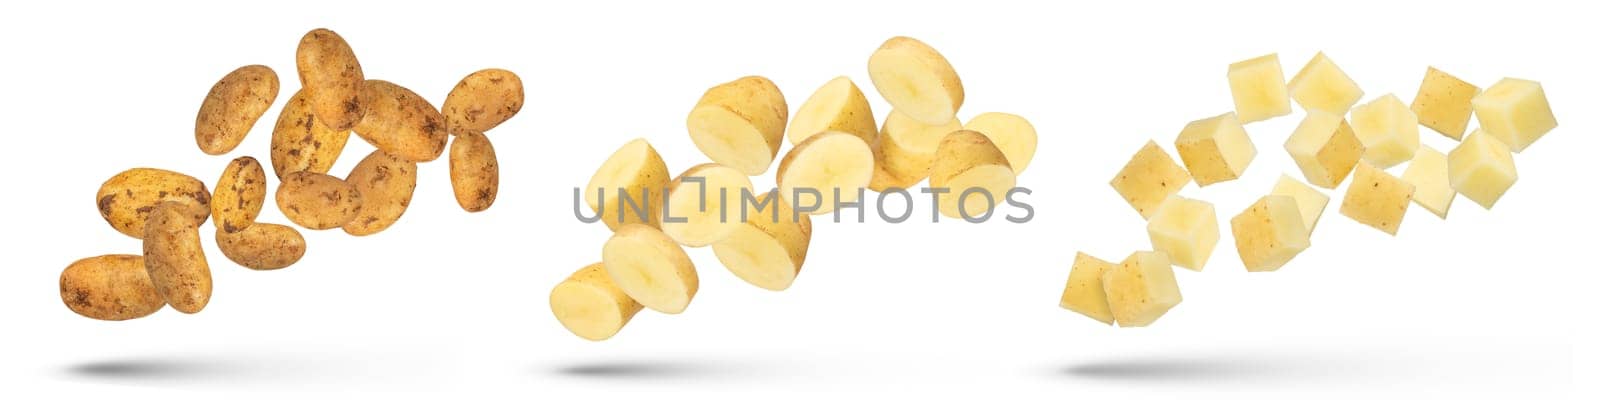 Flying vegetables set. Flying potatoes isolated on white background. Isolate of fresh falling potatoes of different sizes and cut shapes. Potato season. by SERSOL